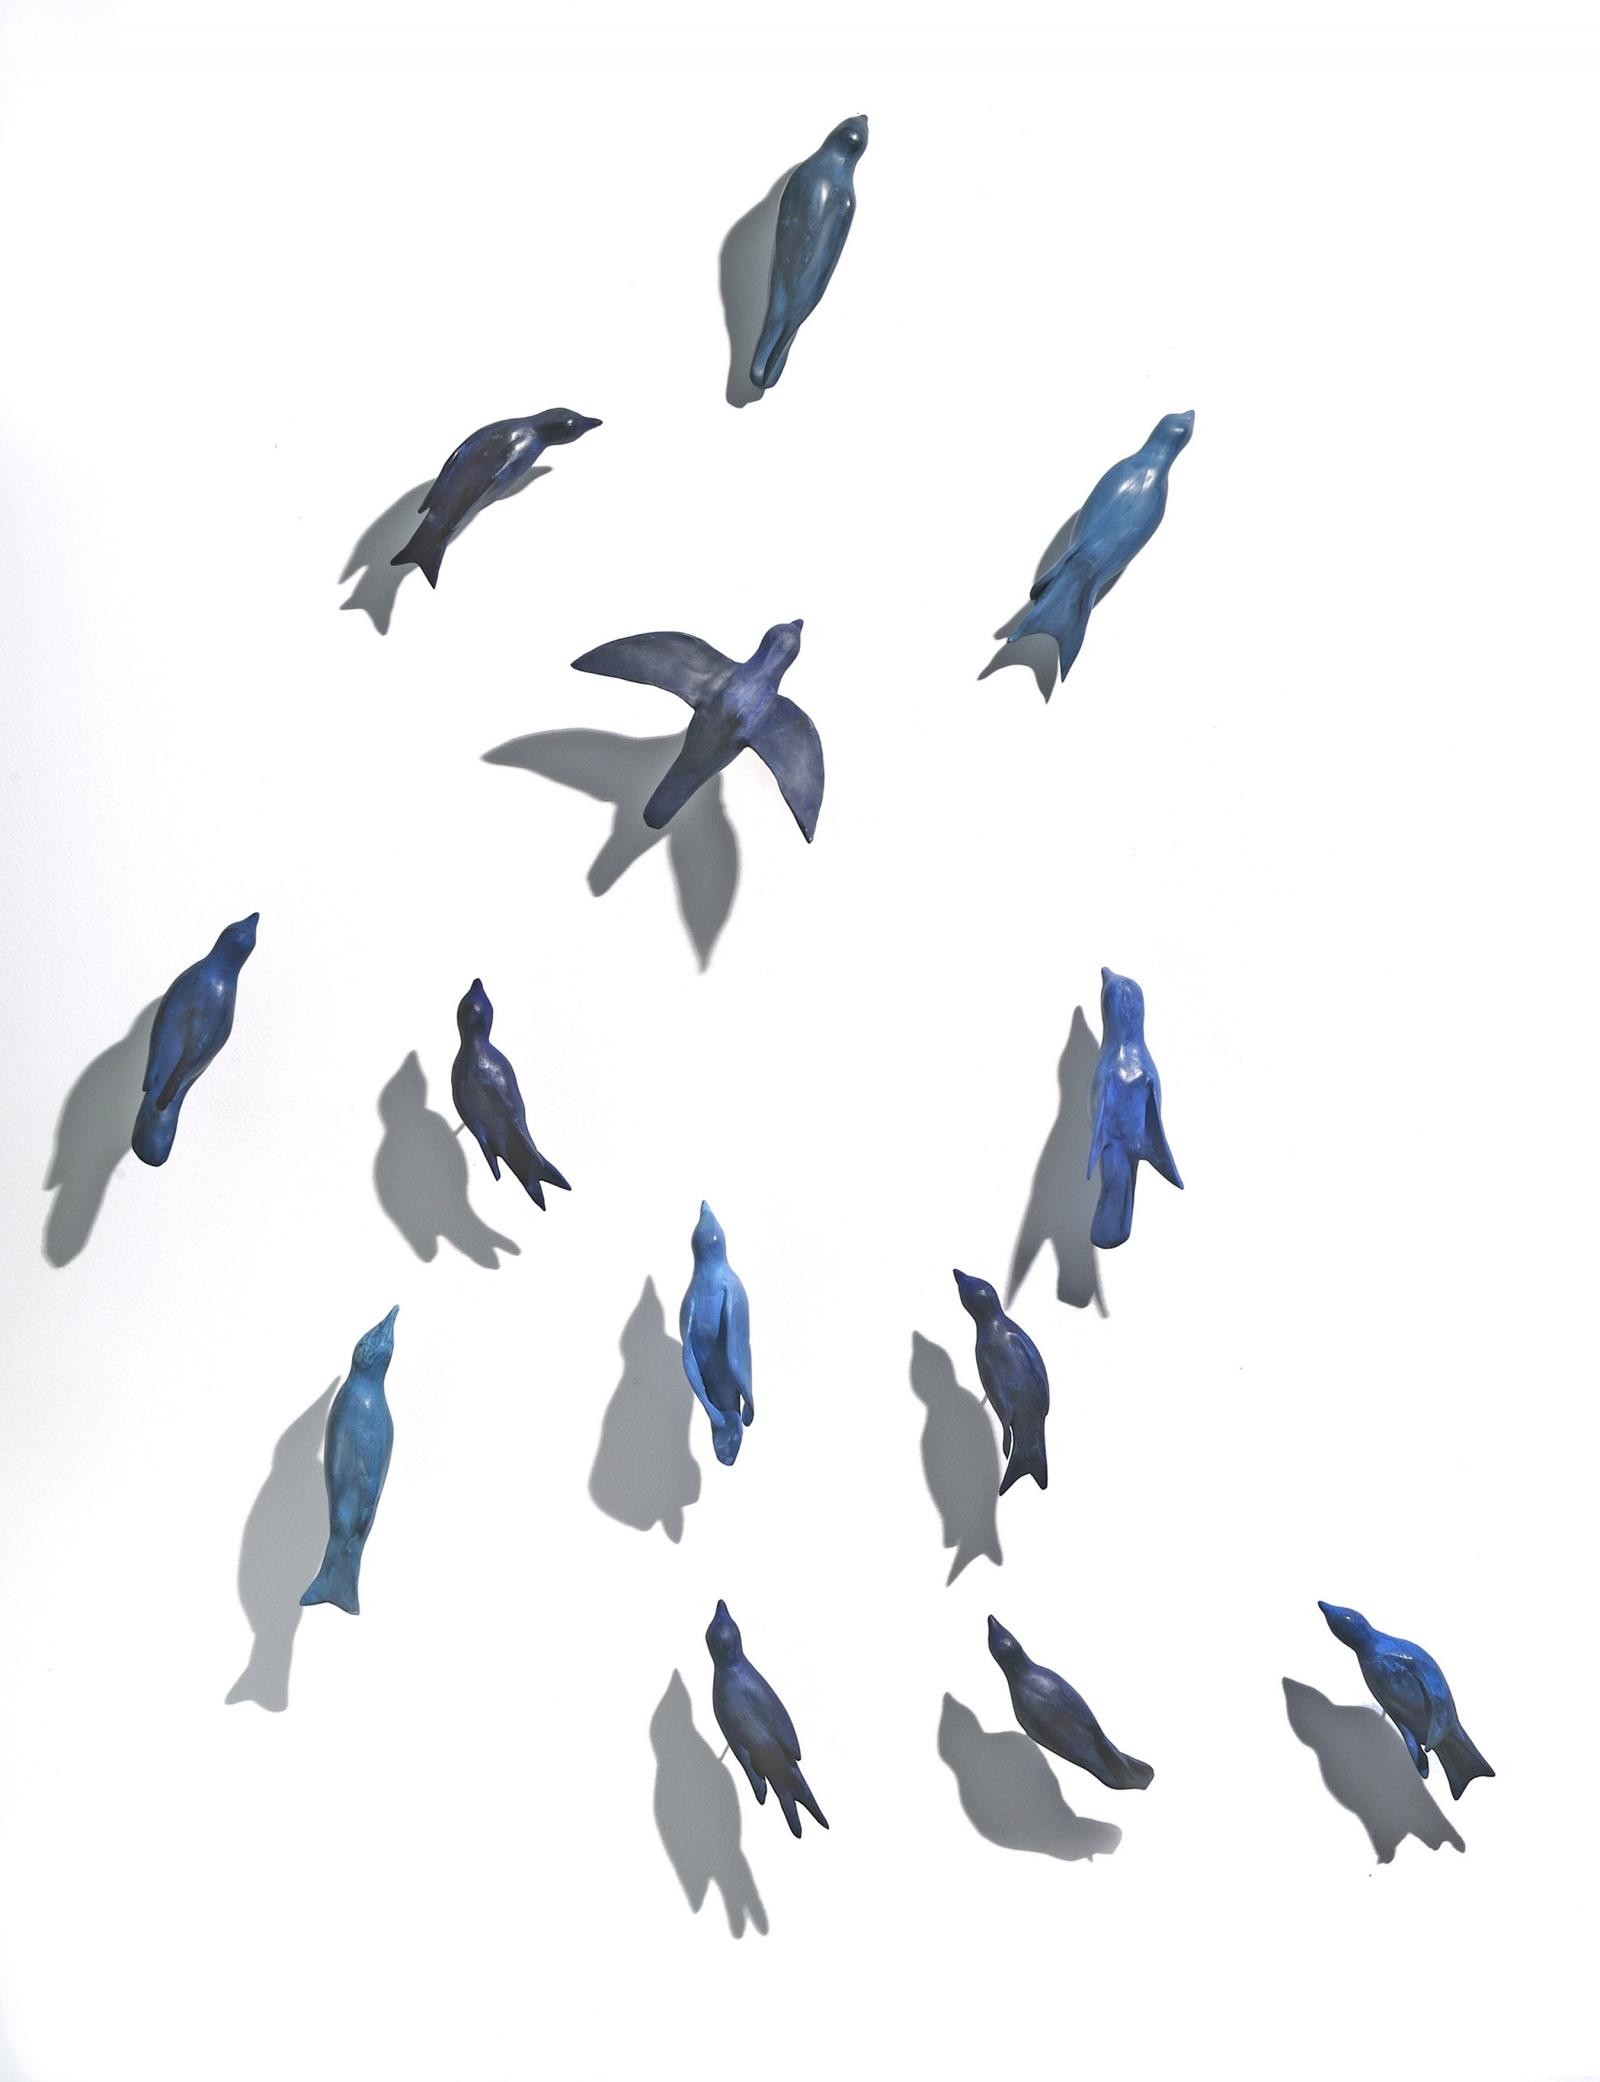 responding to the impact of climate crises on bird migrations, this is a small group (13) of blue birds migrating in formation; comprised of clay and pigments.